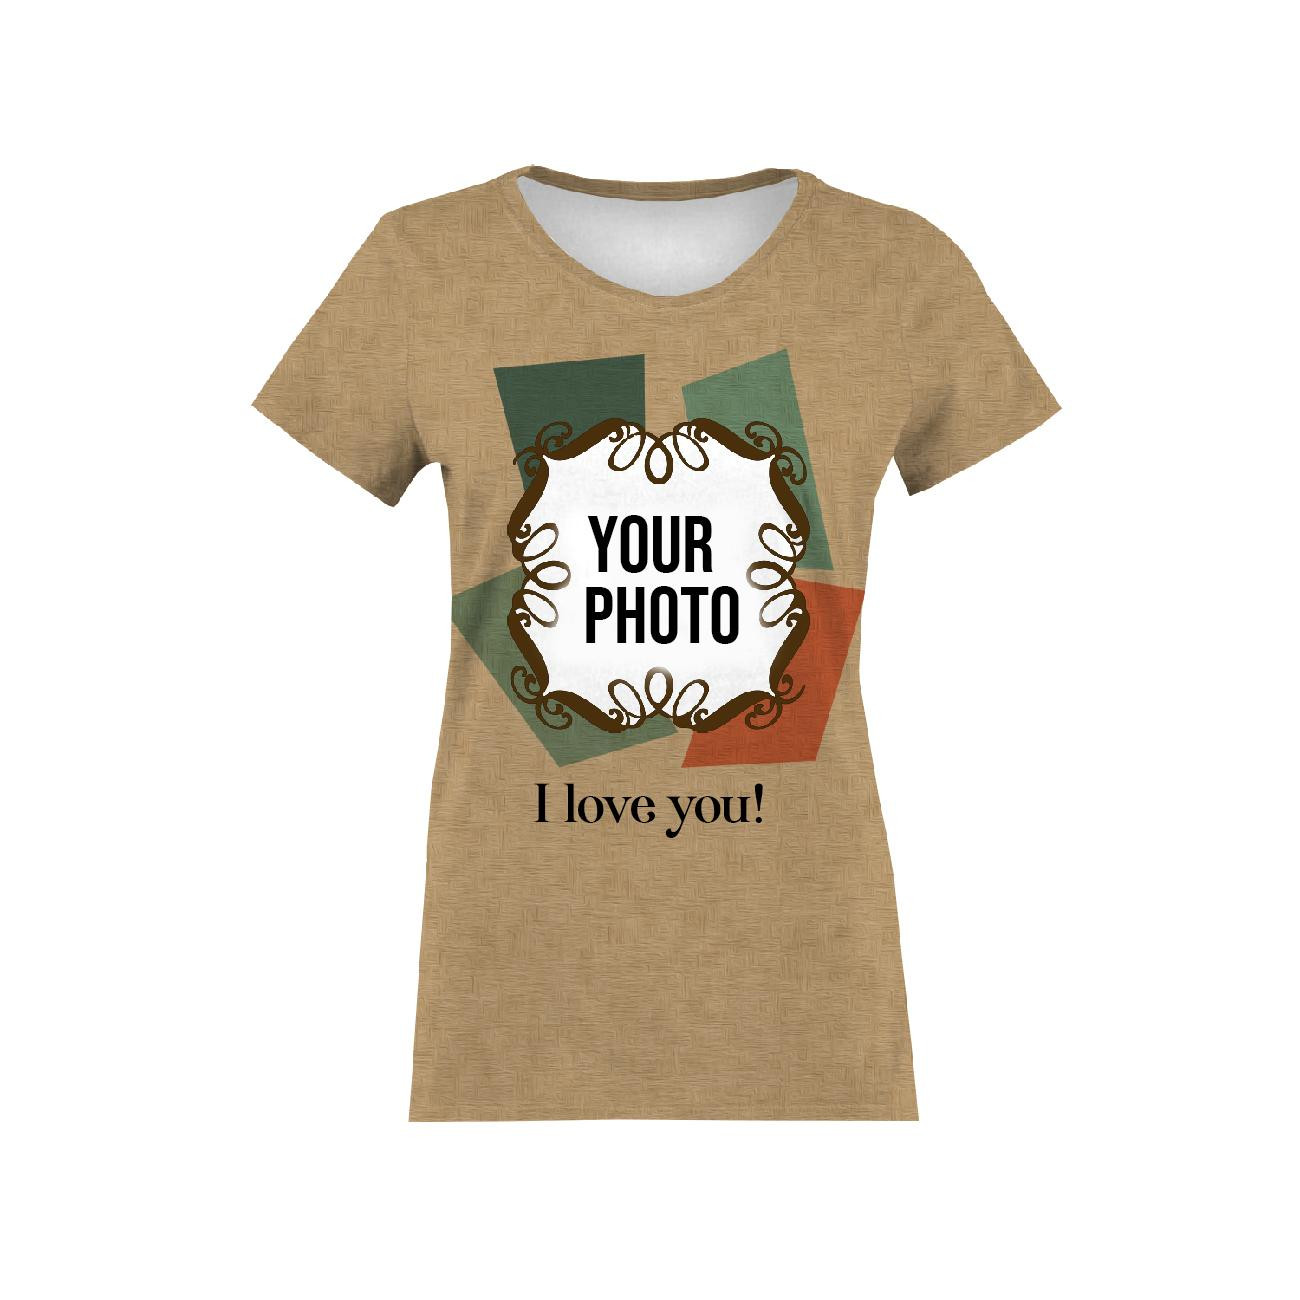 WOMEN'S T-SHIRT - I LOVE YOU PAT. 4 - WITH YOUR OWN PHOTO - sewing set